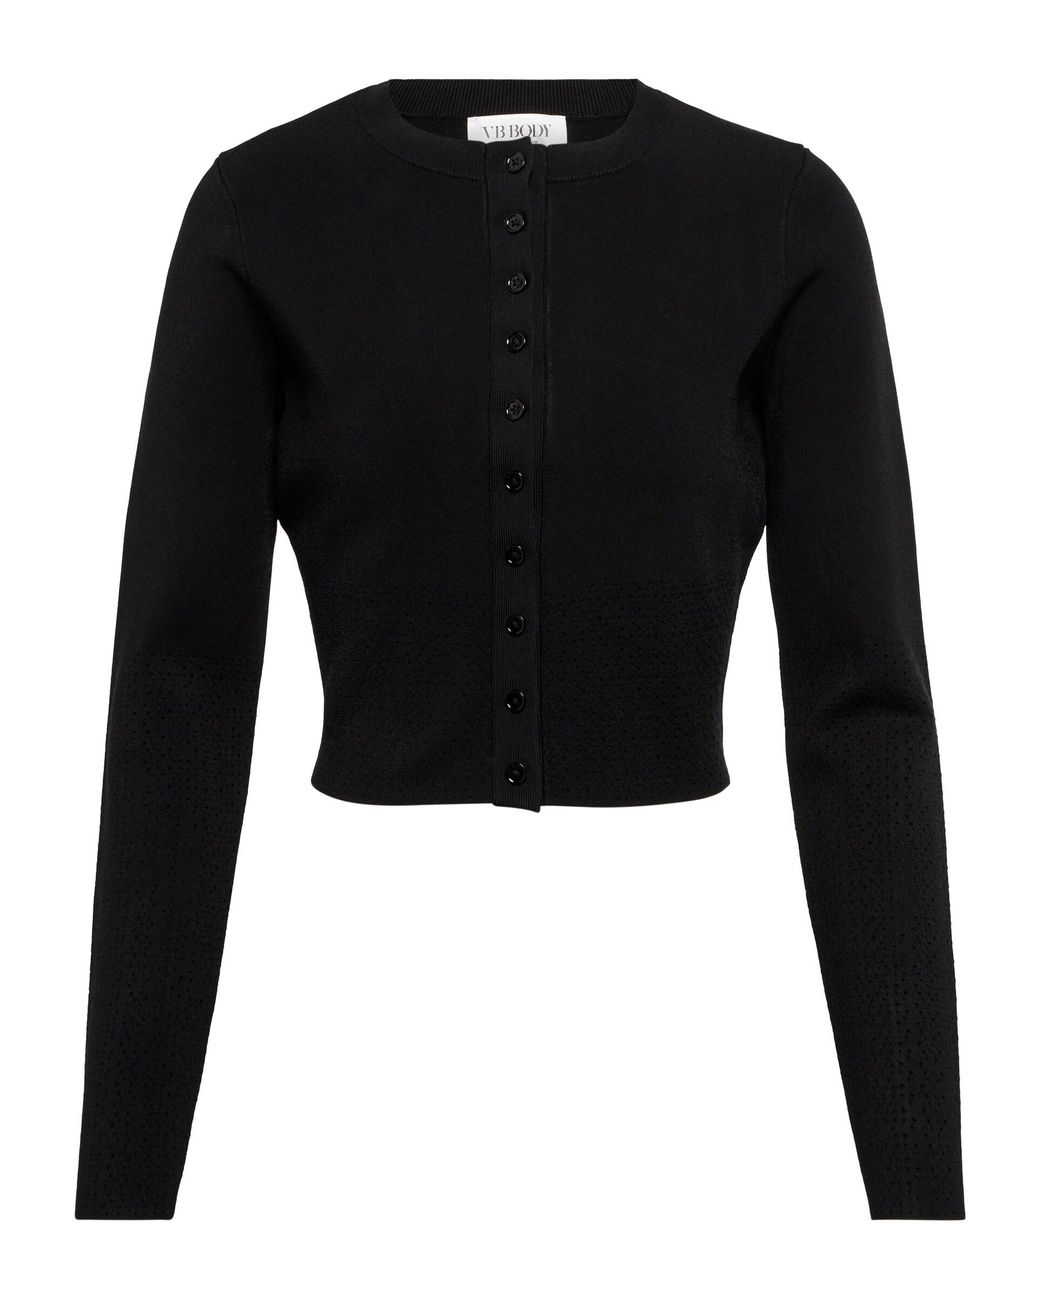 Victoria Beckham Cropped Knit Cardigan in Black | Lyst